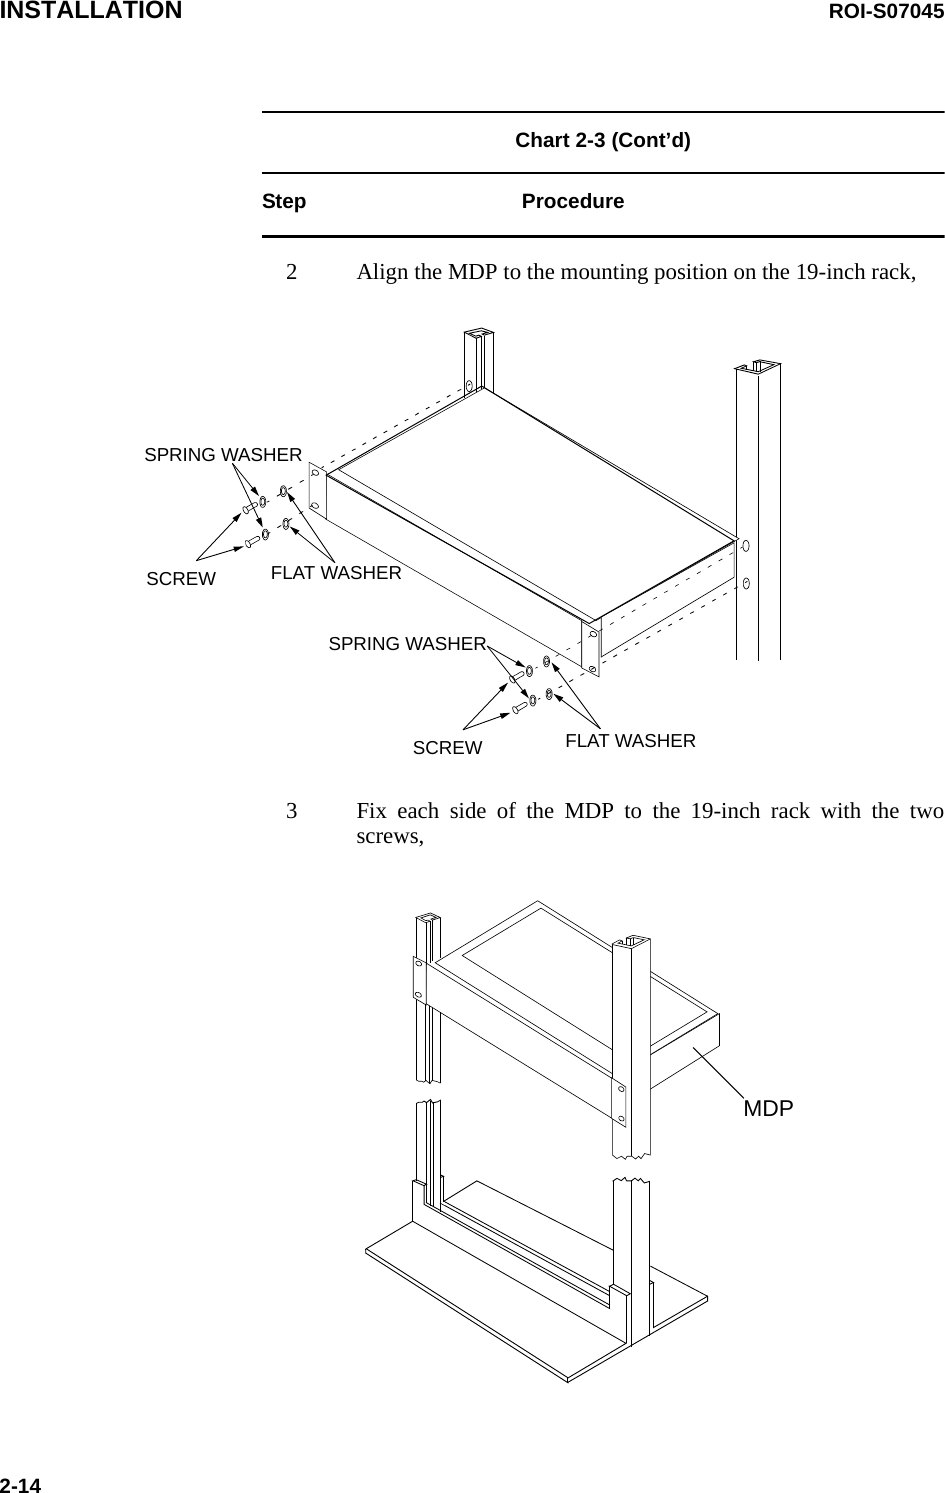 INSTALLATION ROI-S070452-14Chart 2-3 (Cont’d) Step Procedure2 Align the MDP to the mounting position on the 19-inch rack,3 Fix each side of the MDP to the 19-inch rack with the twoscrews,SCREW FLAT WASHERSCREW FLAT WASHERSPRING WASHERSPRING WASHERMDP